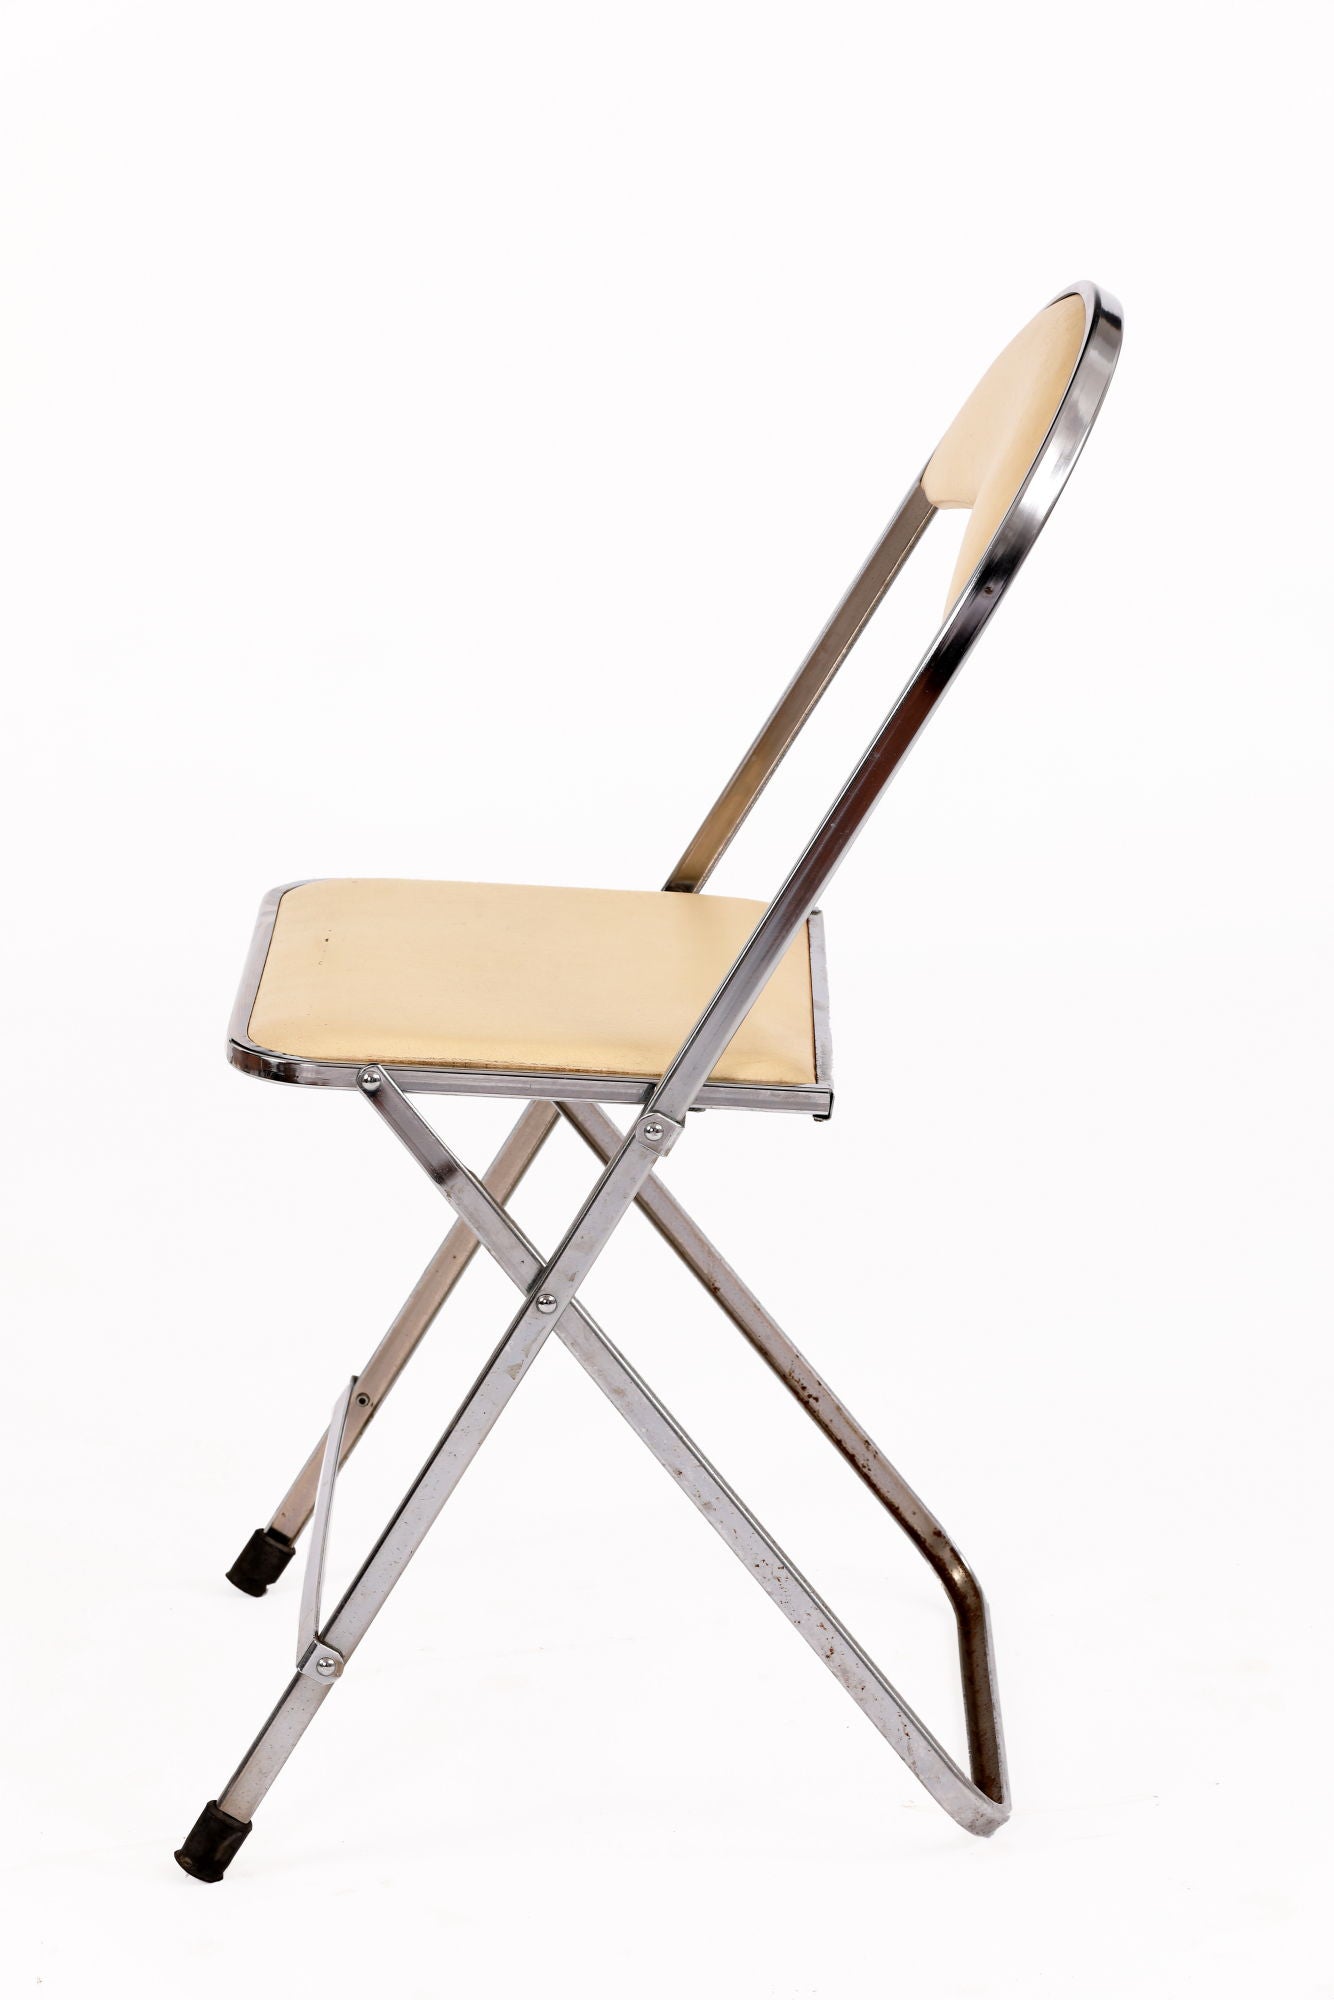 Six 70s steel and leather folding chairs